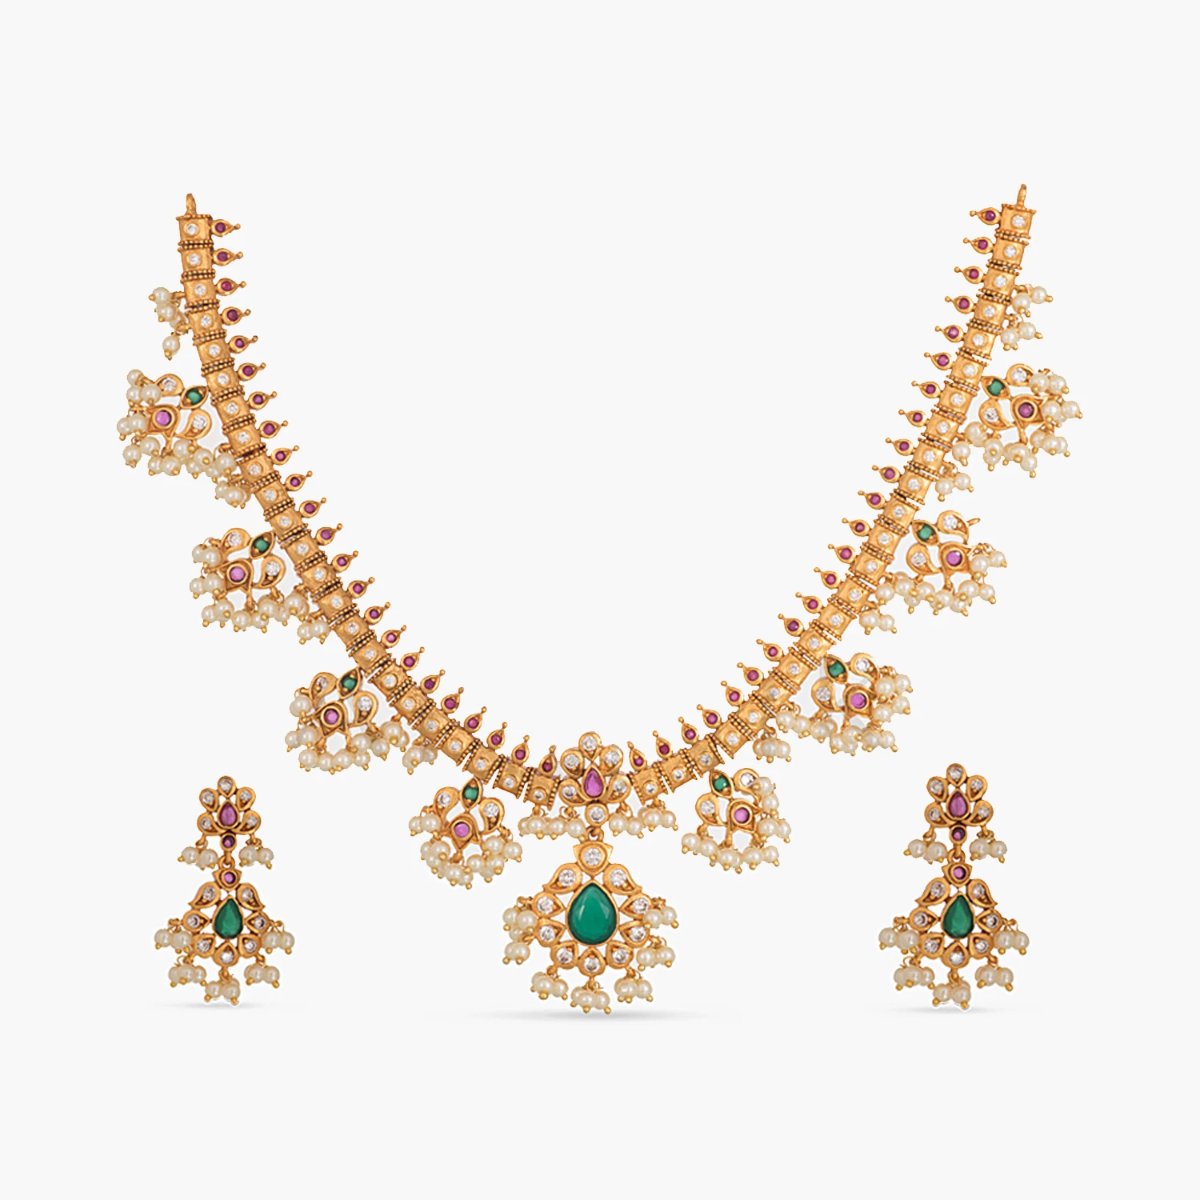 Gold-platedIndian necklace and earrings set with faux pearls and emeralds.